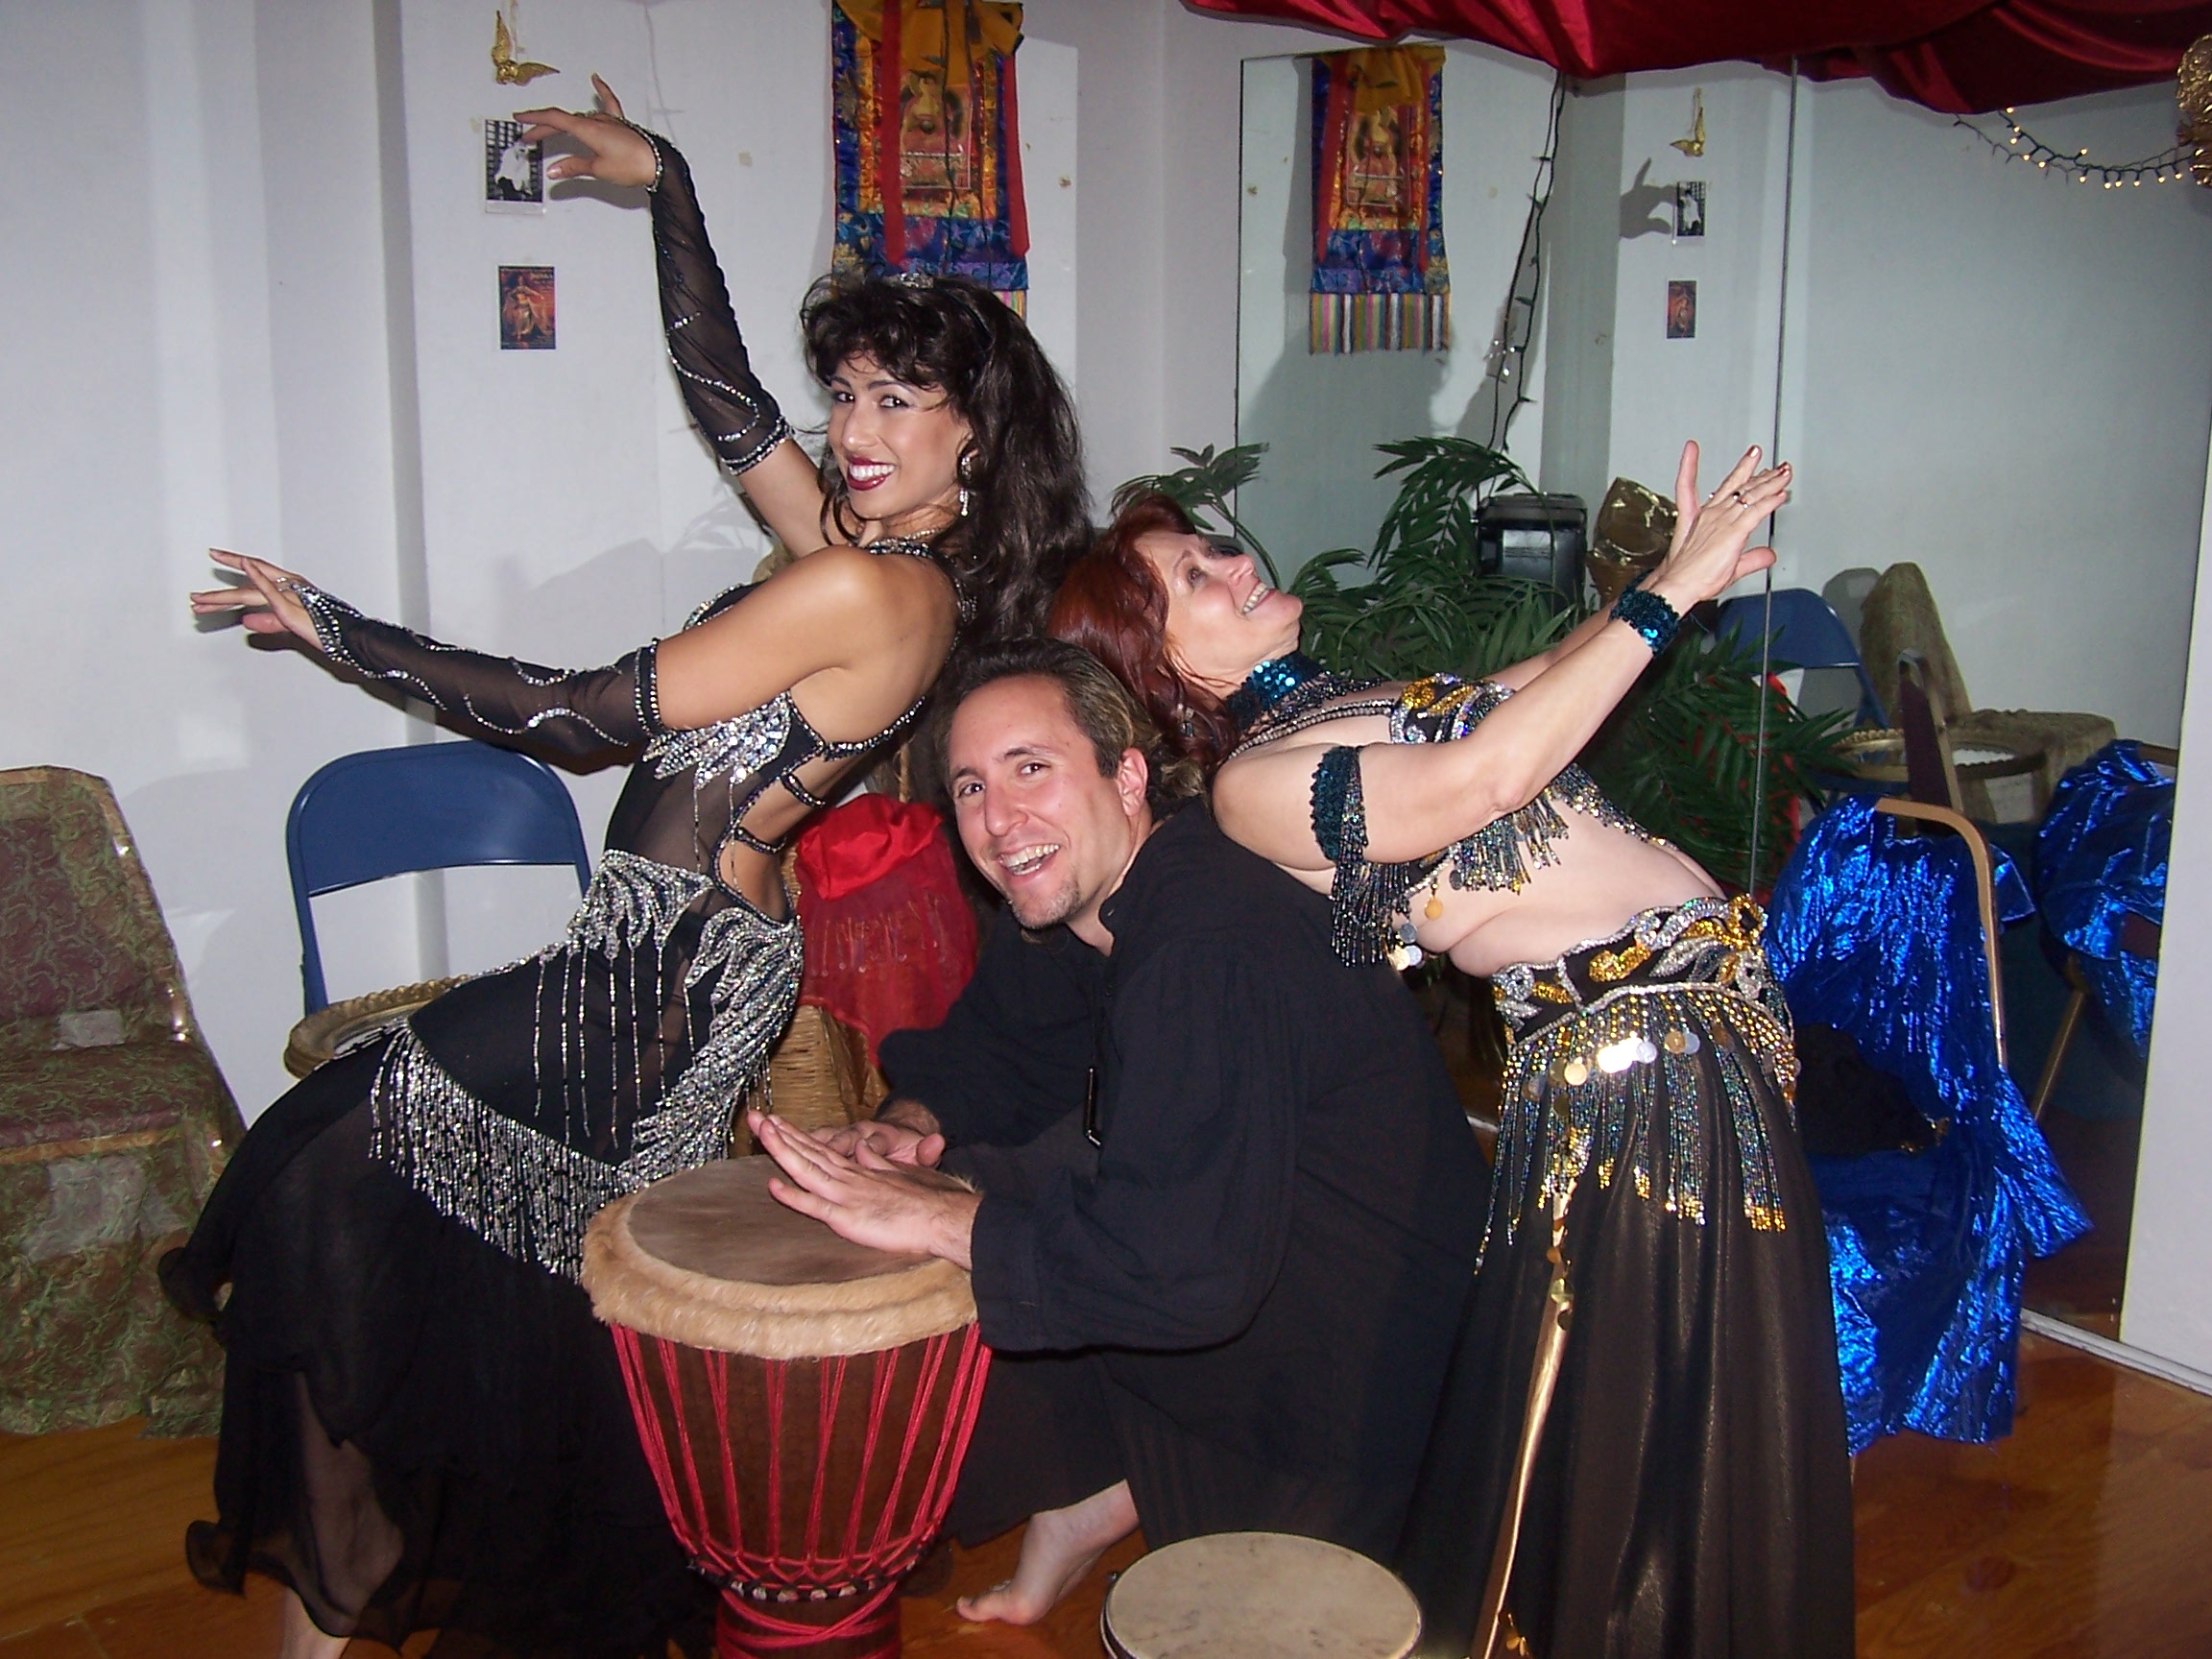 Elly Kaye performing Belly Dance in New York